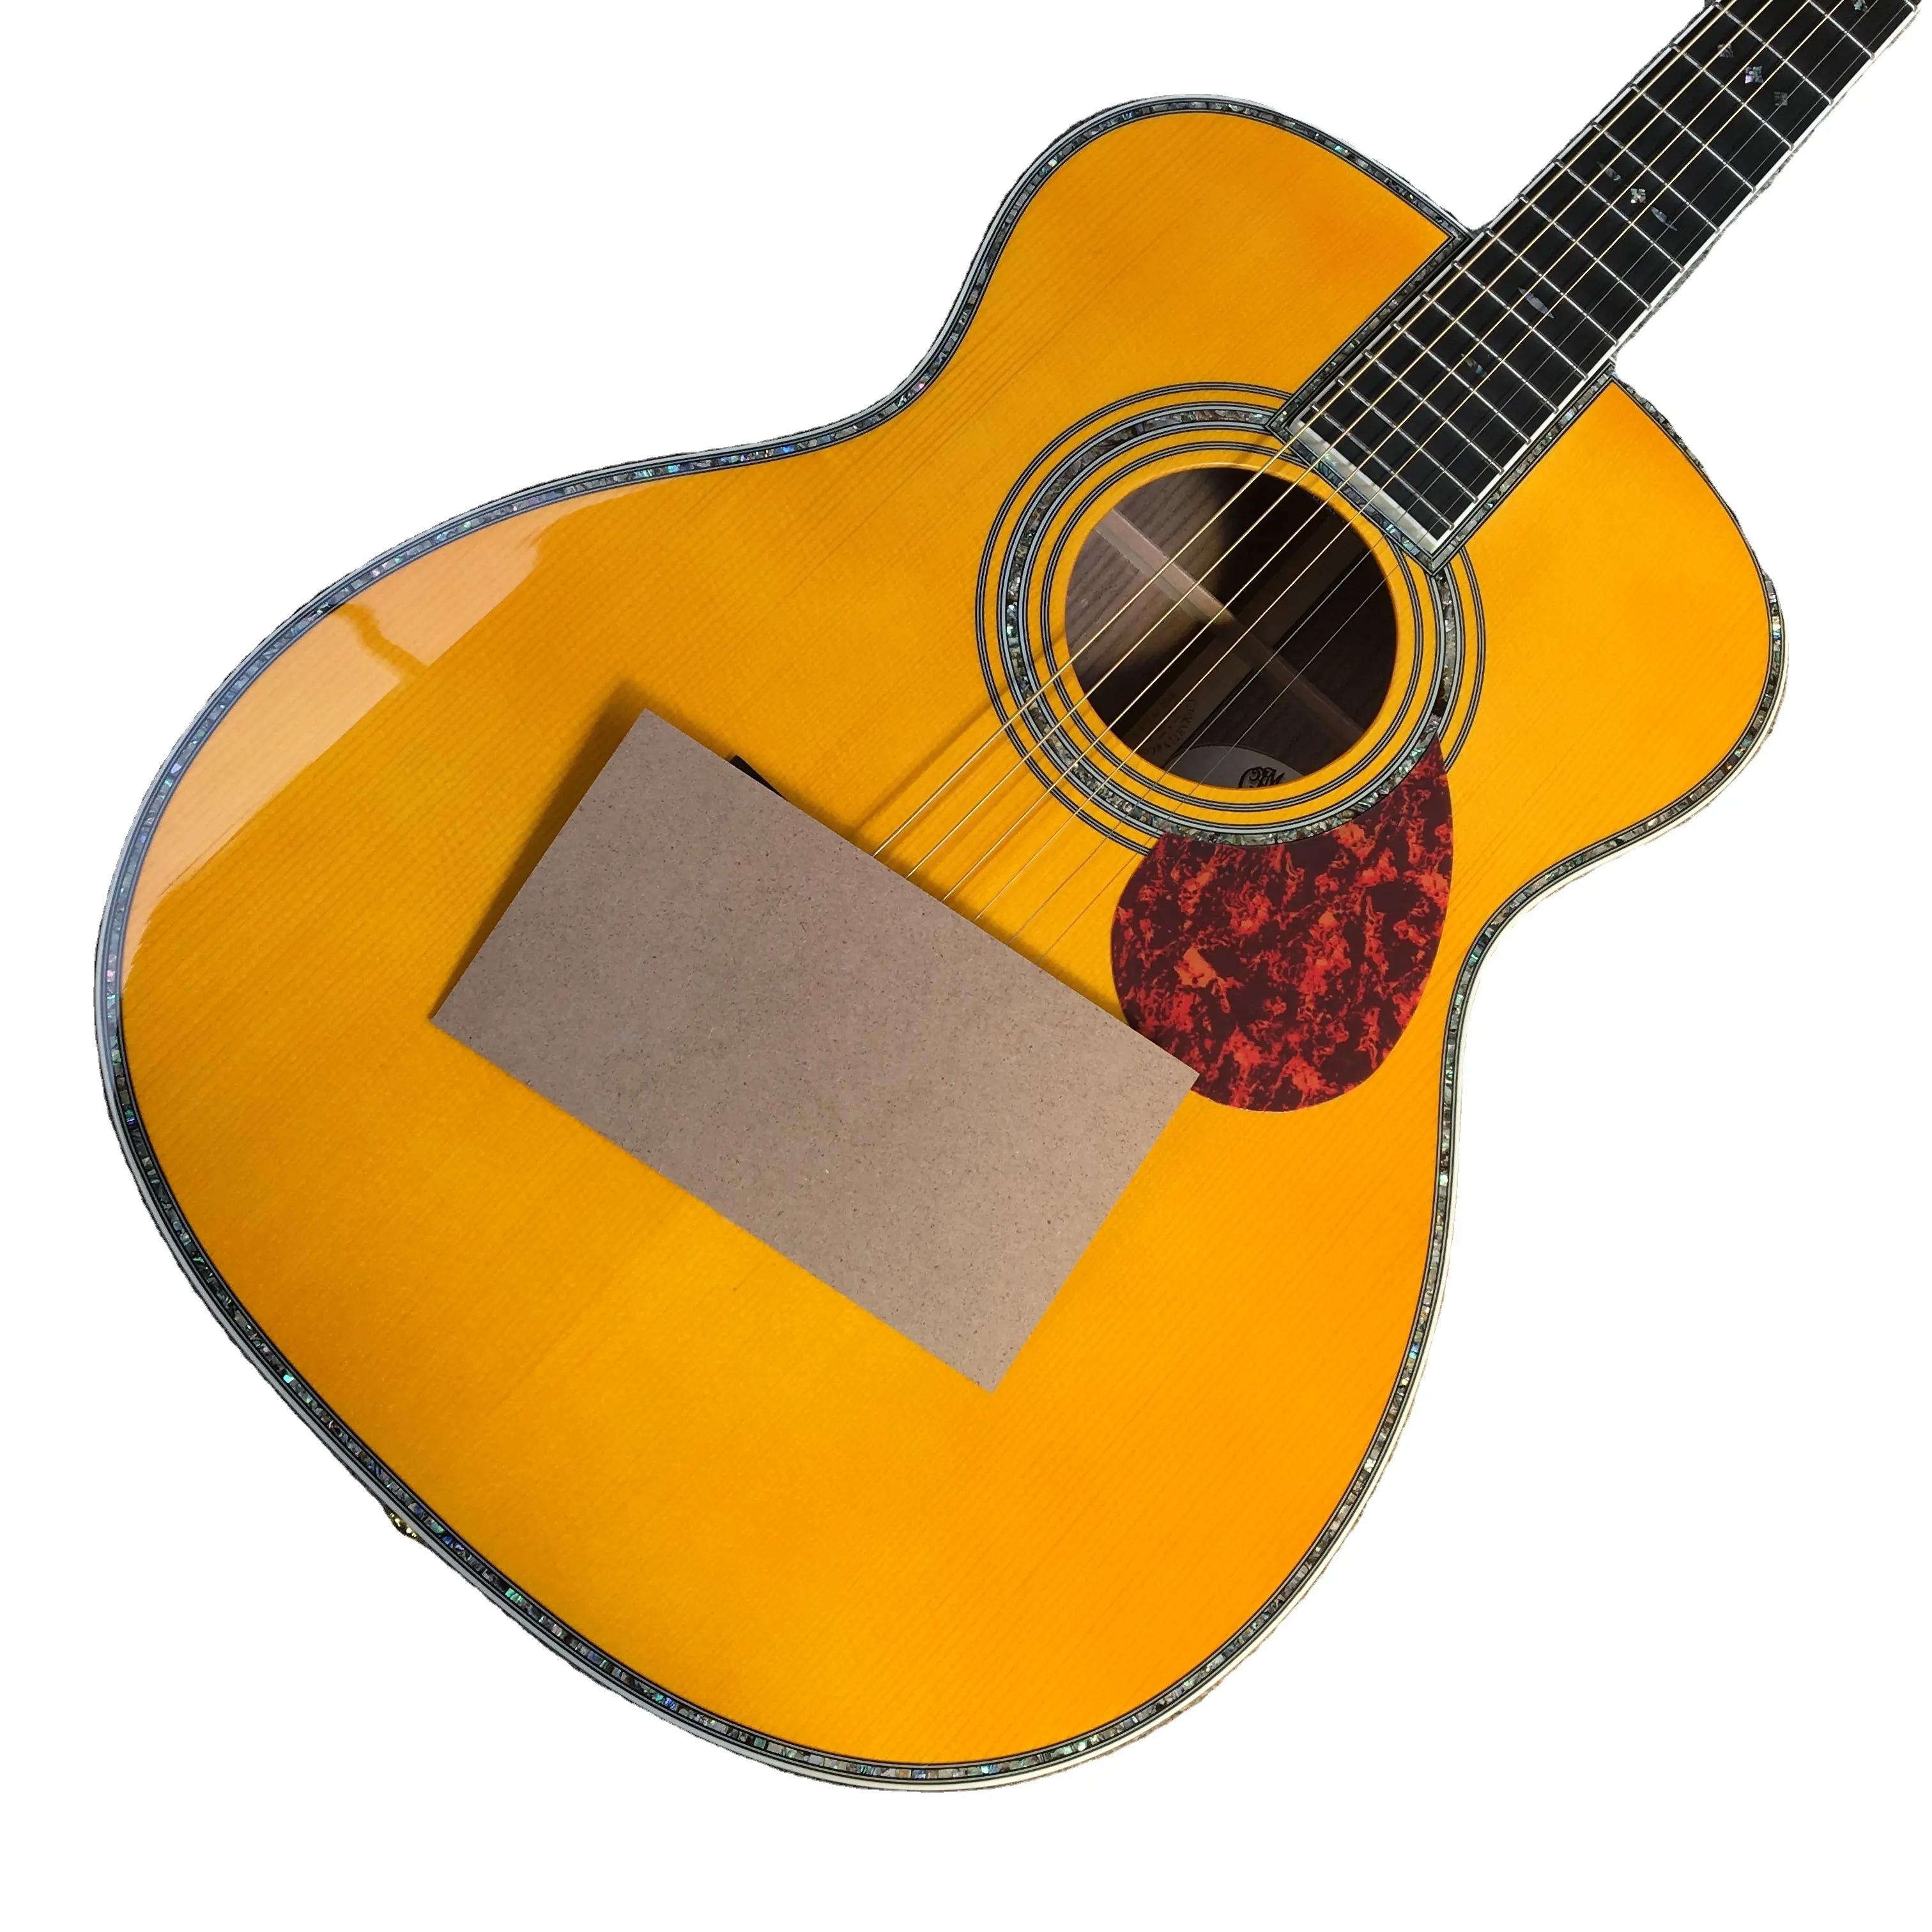 Guitar Plant Manufacture Famous World Brand China Made 6 String acoustic Guitar yellow OM42